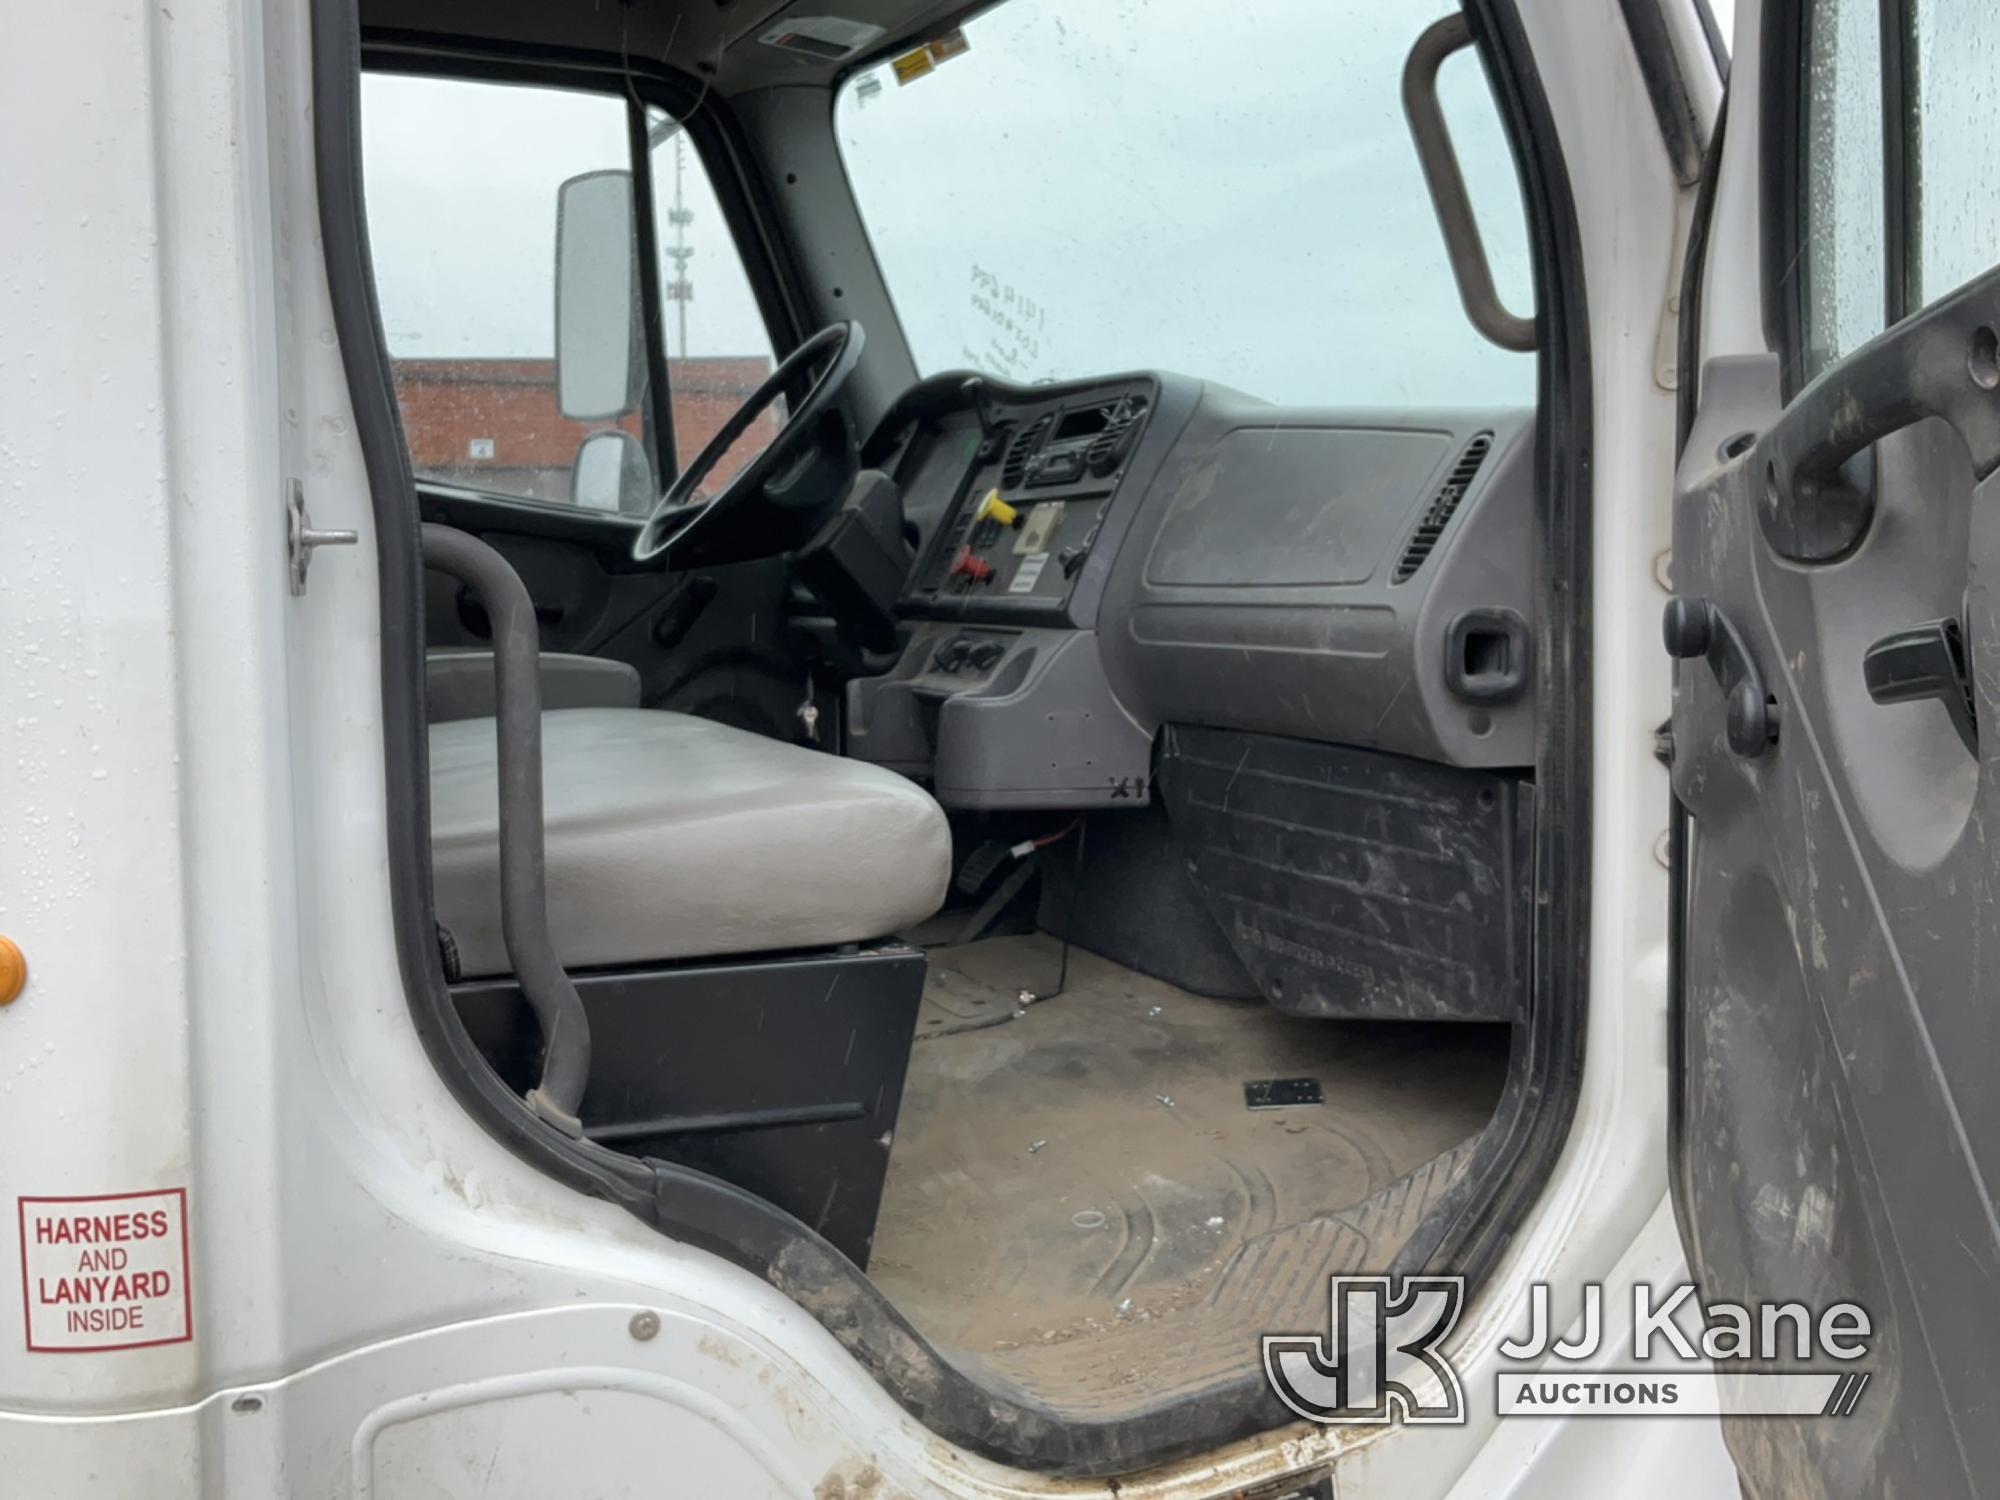 (Des Moines, IA) Altec AA55E, Material Handling Bucket Truck rear mounted on 2016 Freightliner M2 Ut